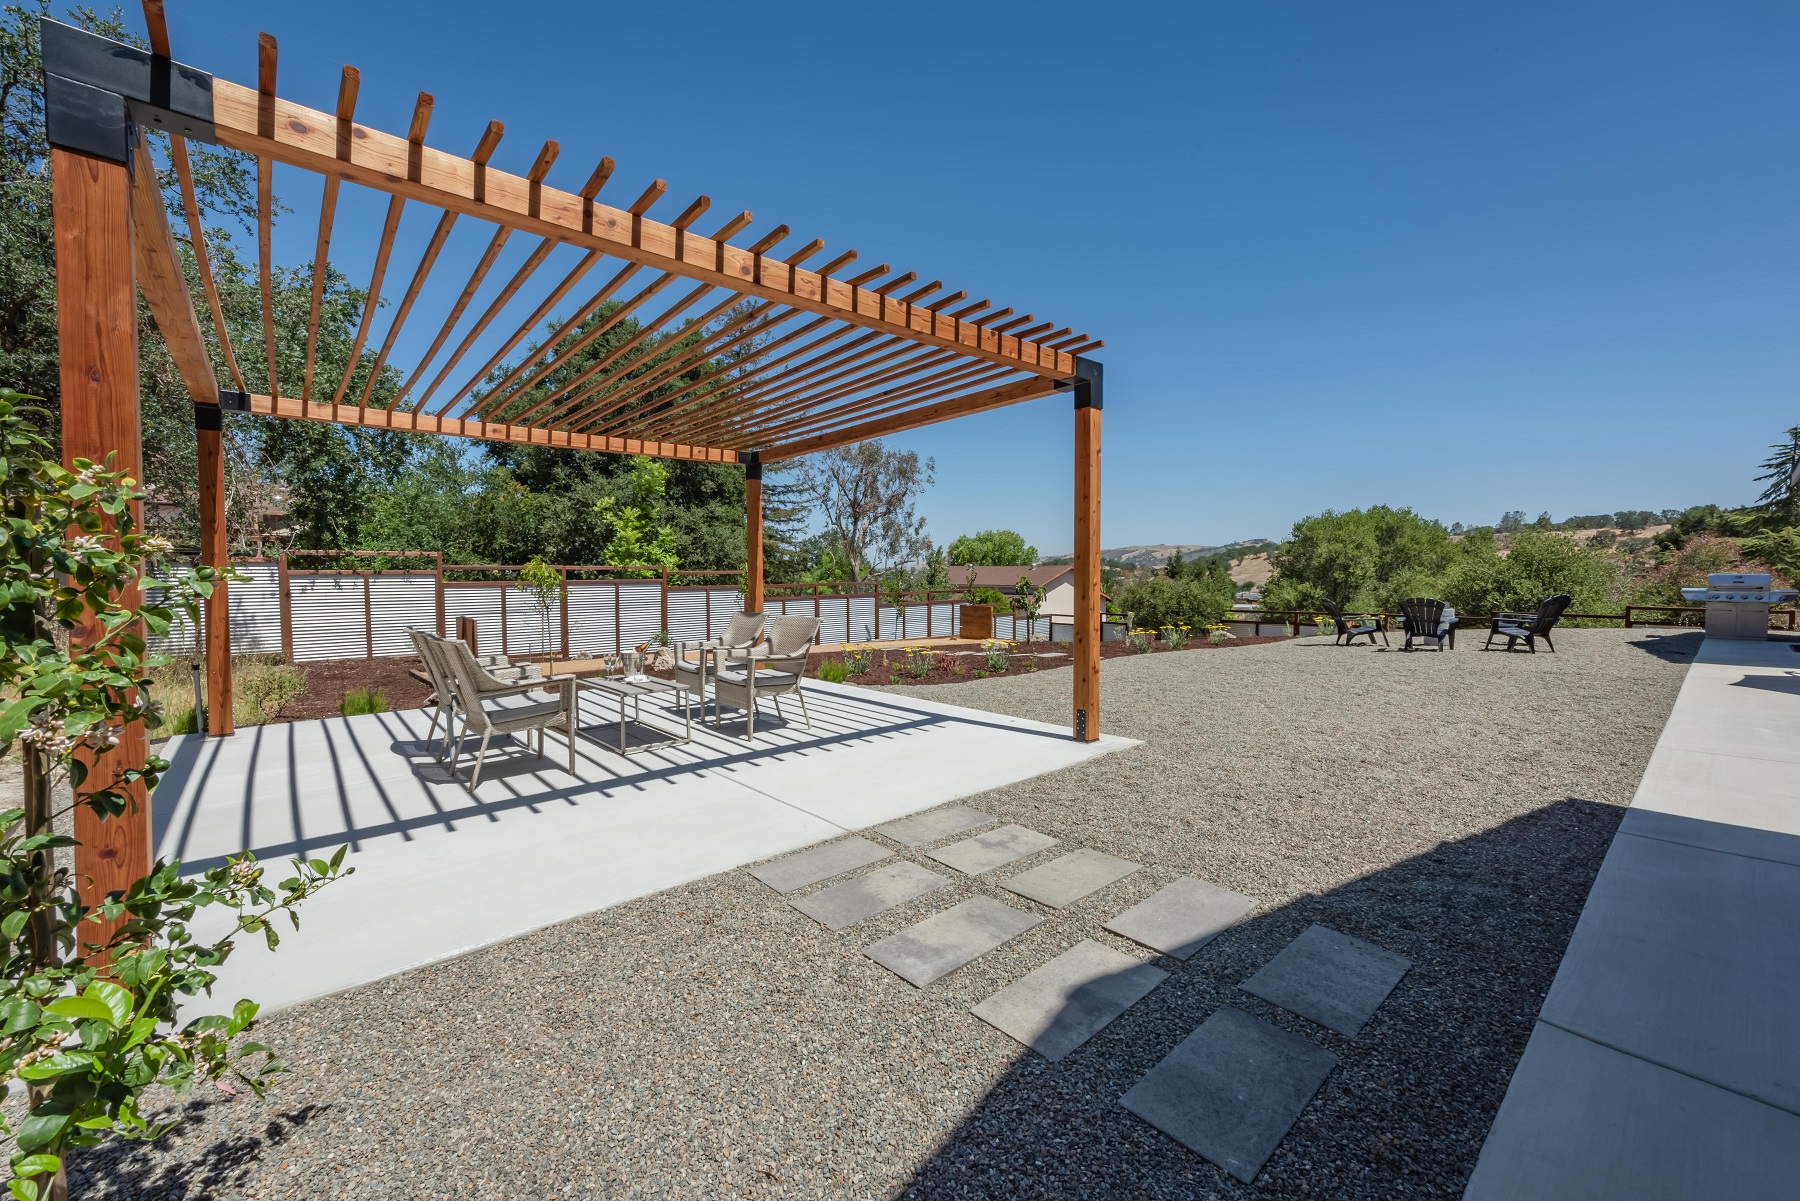 Trellis-covered patio with seating for four